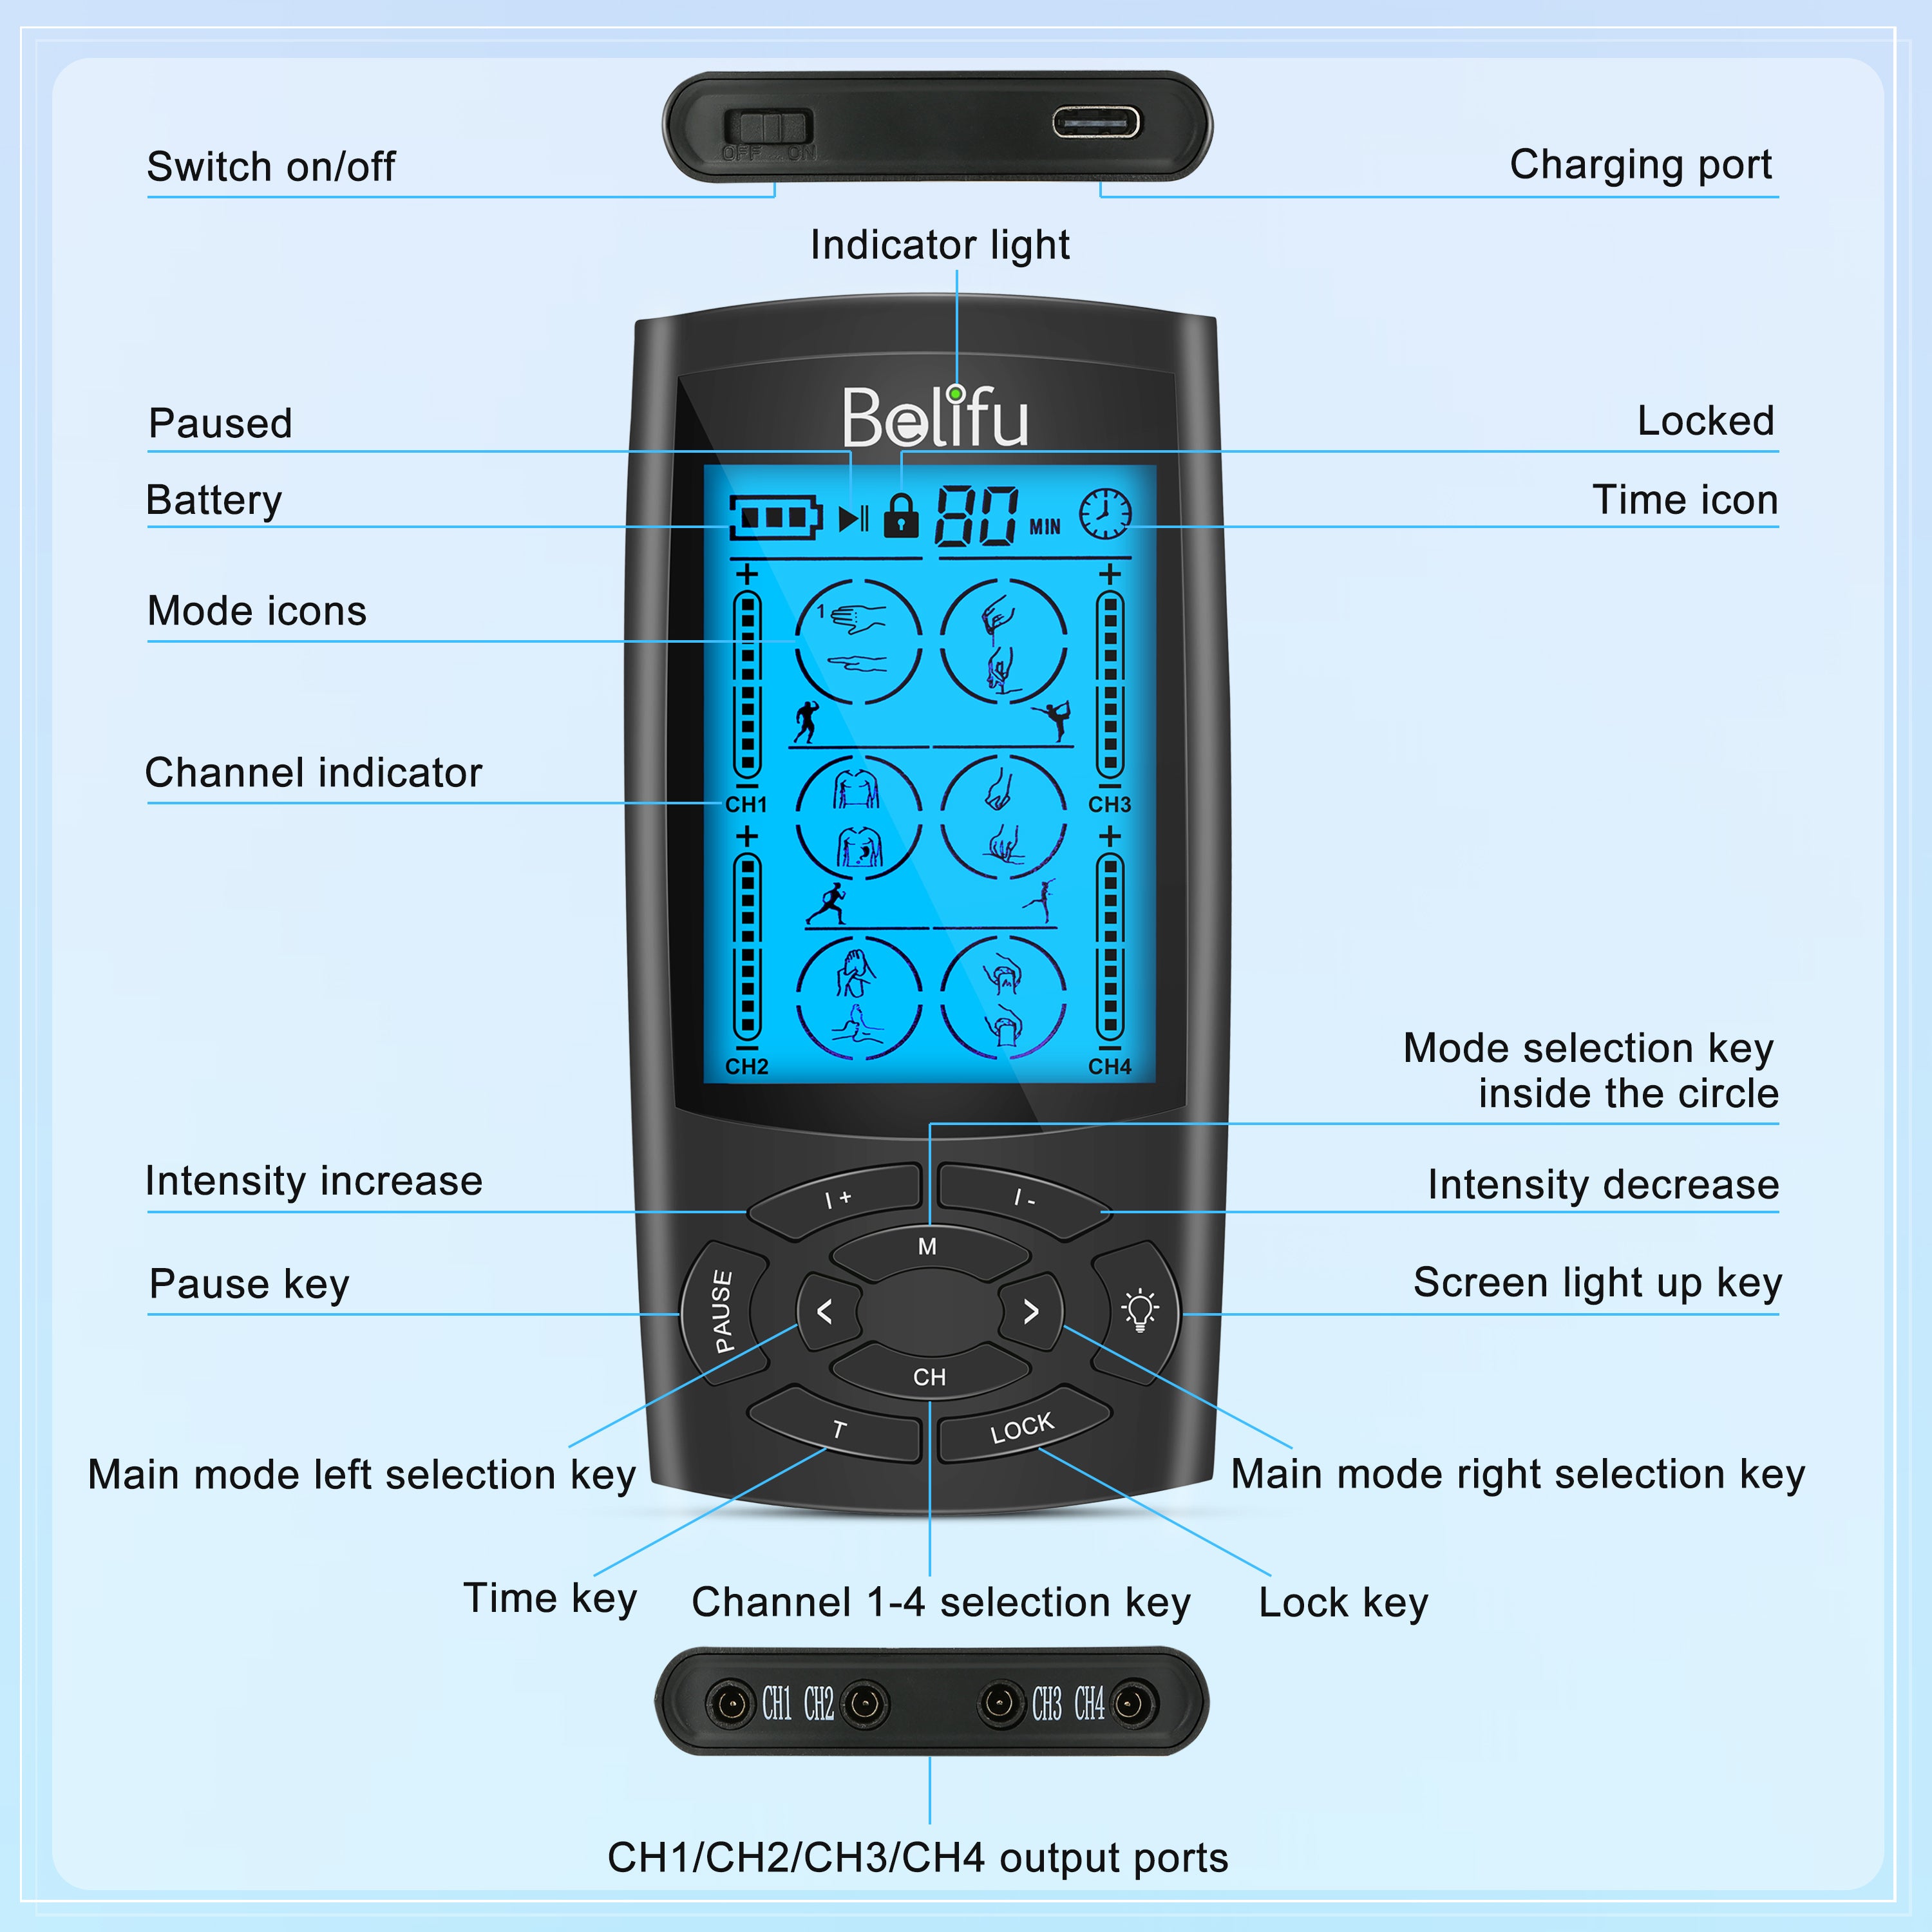 Belifu 4 Independent Channel TENS EMS Unit, TENS Unit Muscle Stimulator for Pain Relief, 24 Modes 20 Level Intensity, Rechargeable Electric Pulse Massager with Large Screen, 10 Pads, Storage Bag